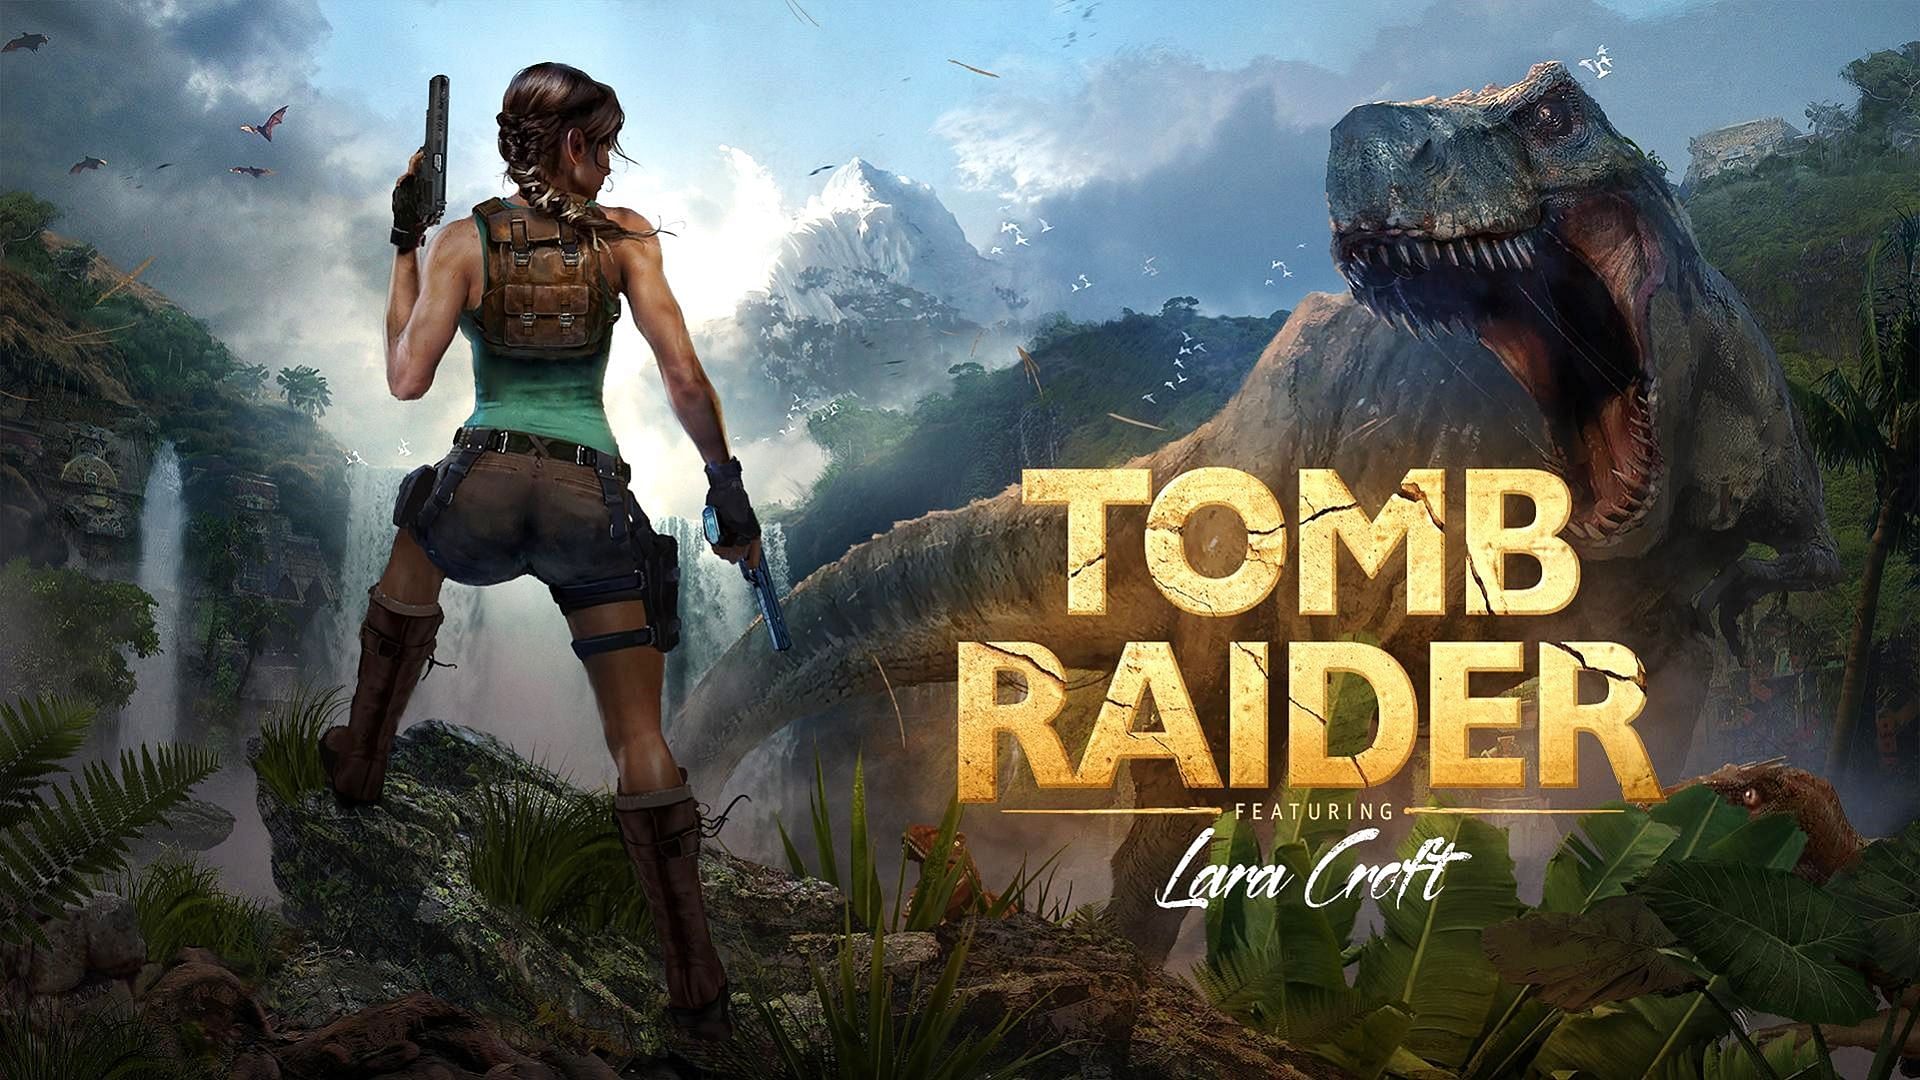 A still from the new iteration of Lara Croft for the next video game in the series (Image via Amazon Games/Crystal Dynamics)